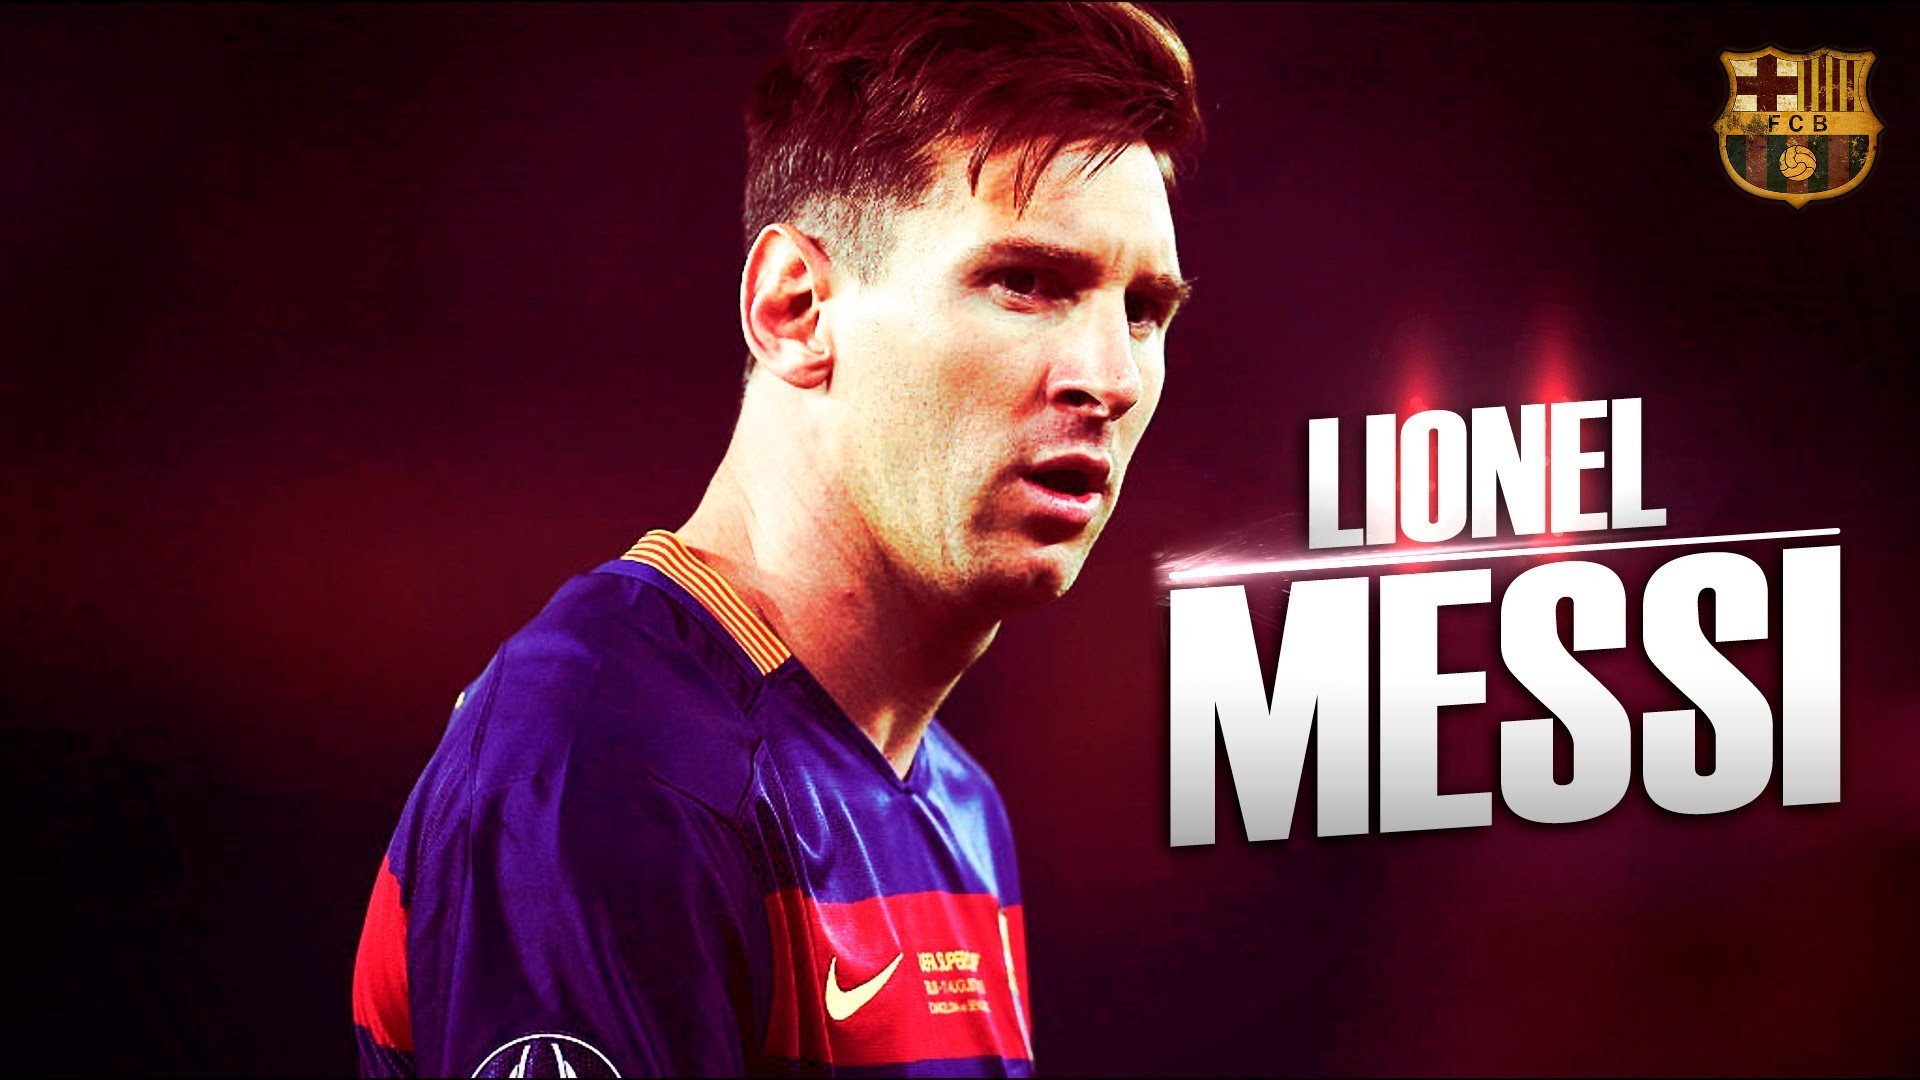 Lionel Messi For PC Wallpaper with resolution 1920x1080 pixel. You can make this wallpaper for your Mac or Windows Desktop Background, iPhone, Android or Tablet and another Smartphone device